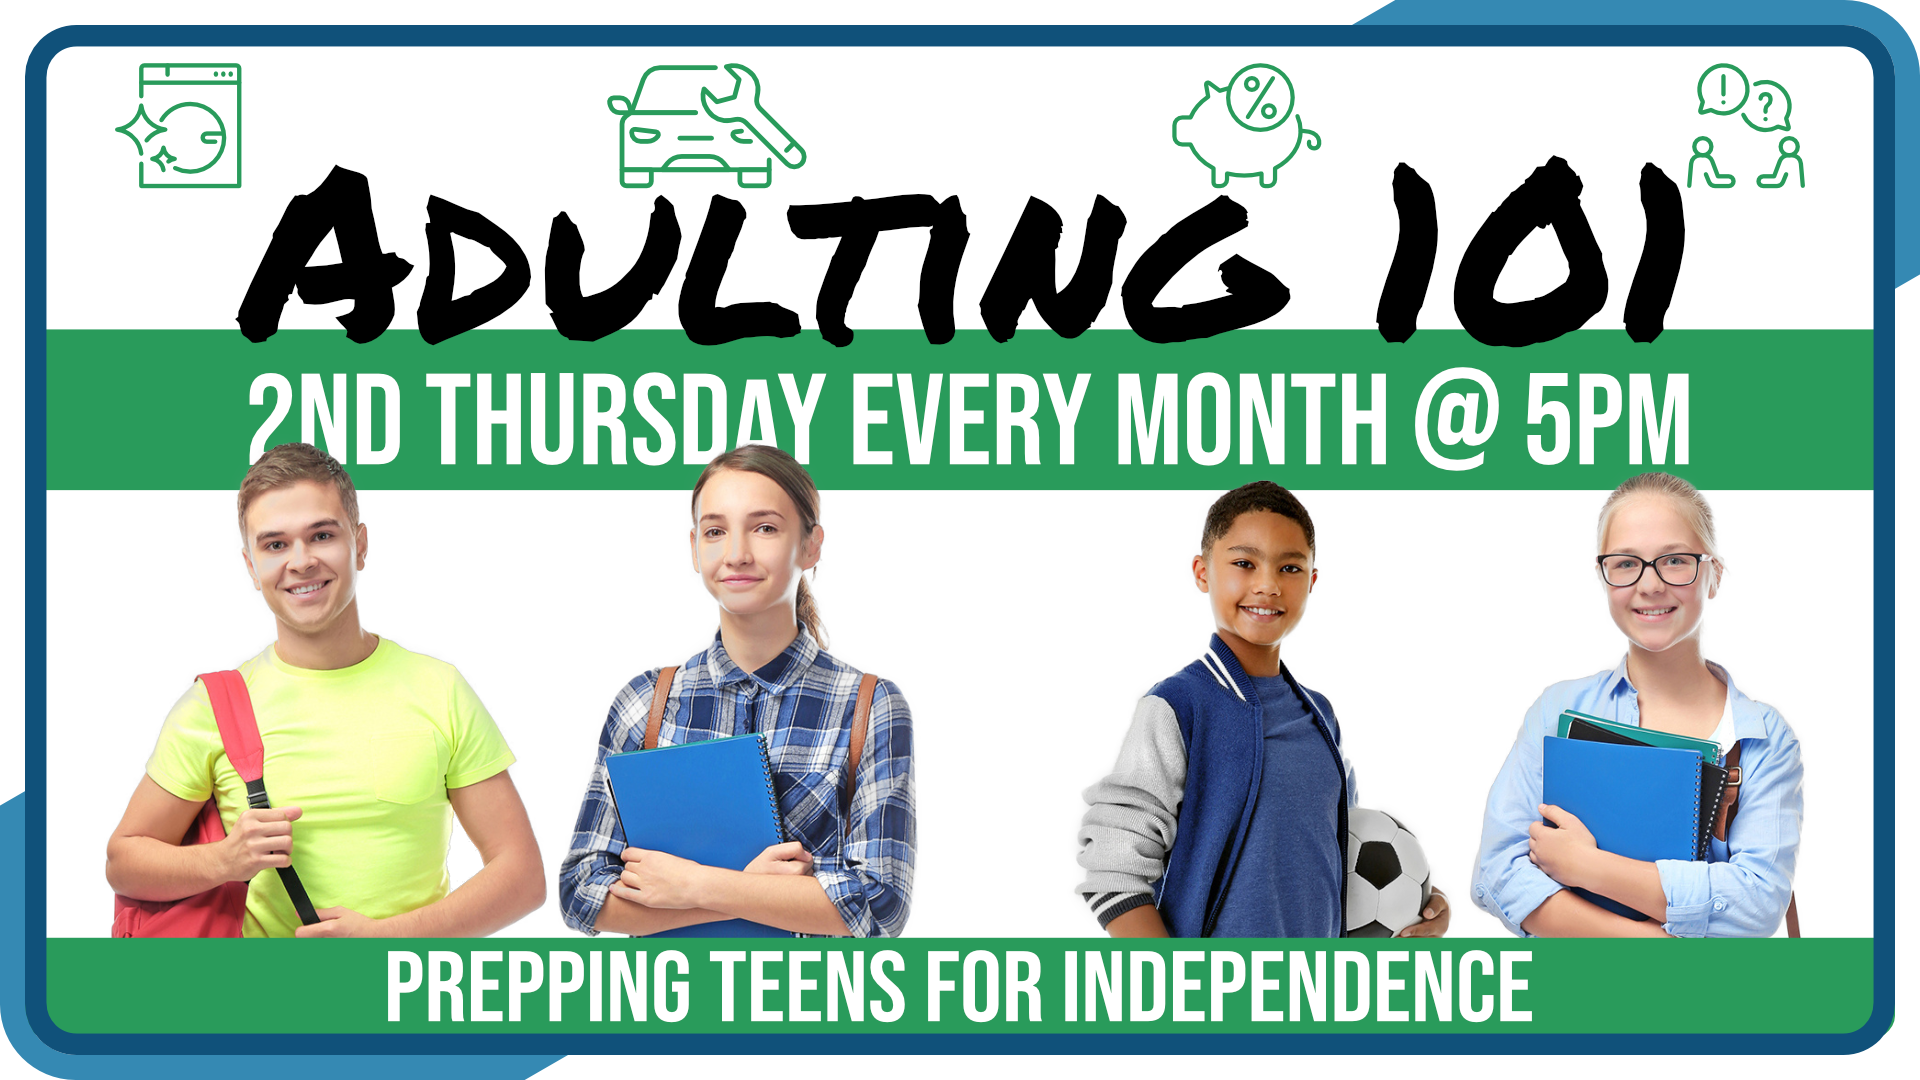 Adulting 101, second Thursday monthly at 5pm, intended for grades 6-12